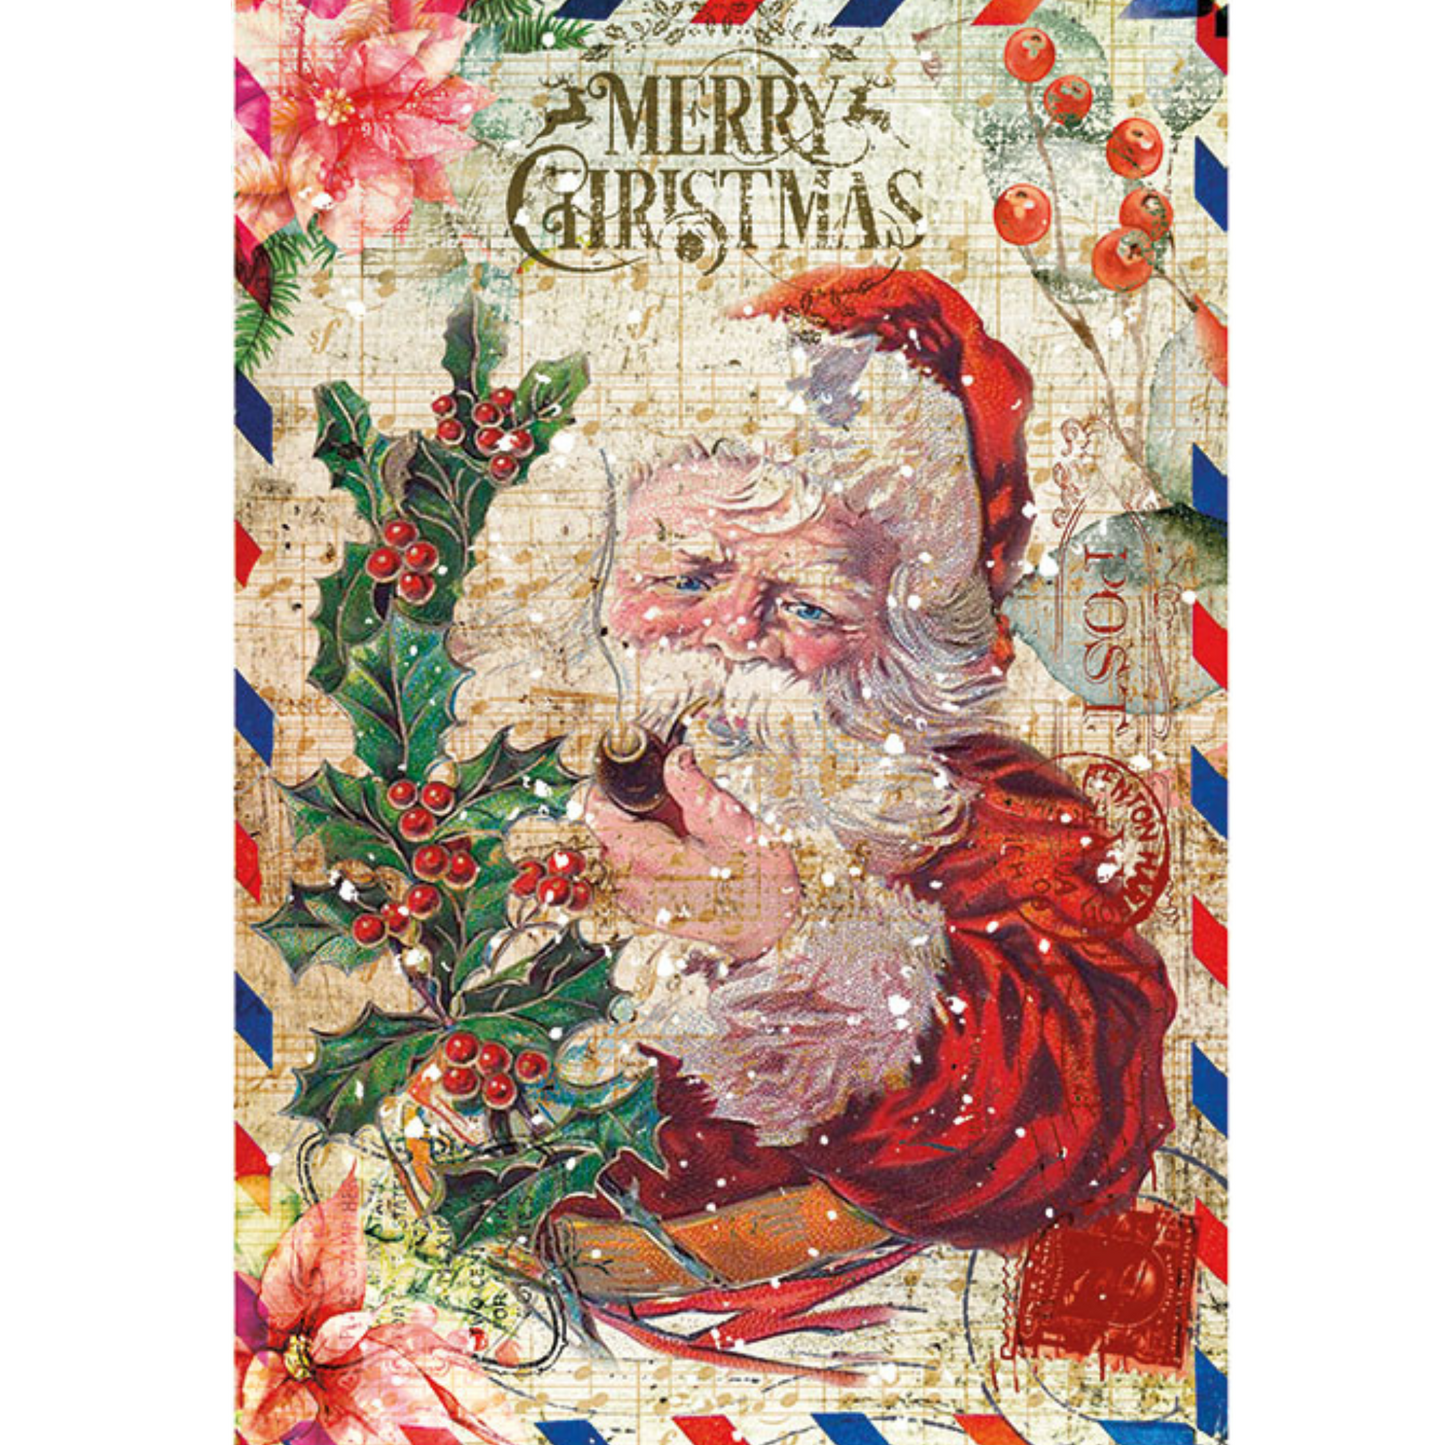 "Christmas-0334" Paper Designs Decoupage Rice Paper imported from Italy available at Milton's Daughter in size A4- 8.3" x 11.7"